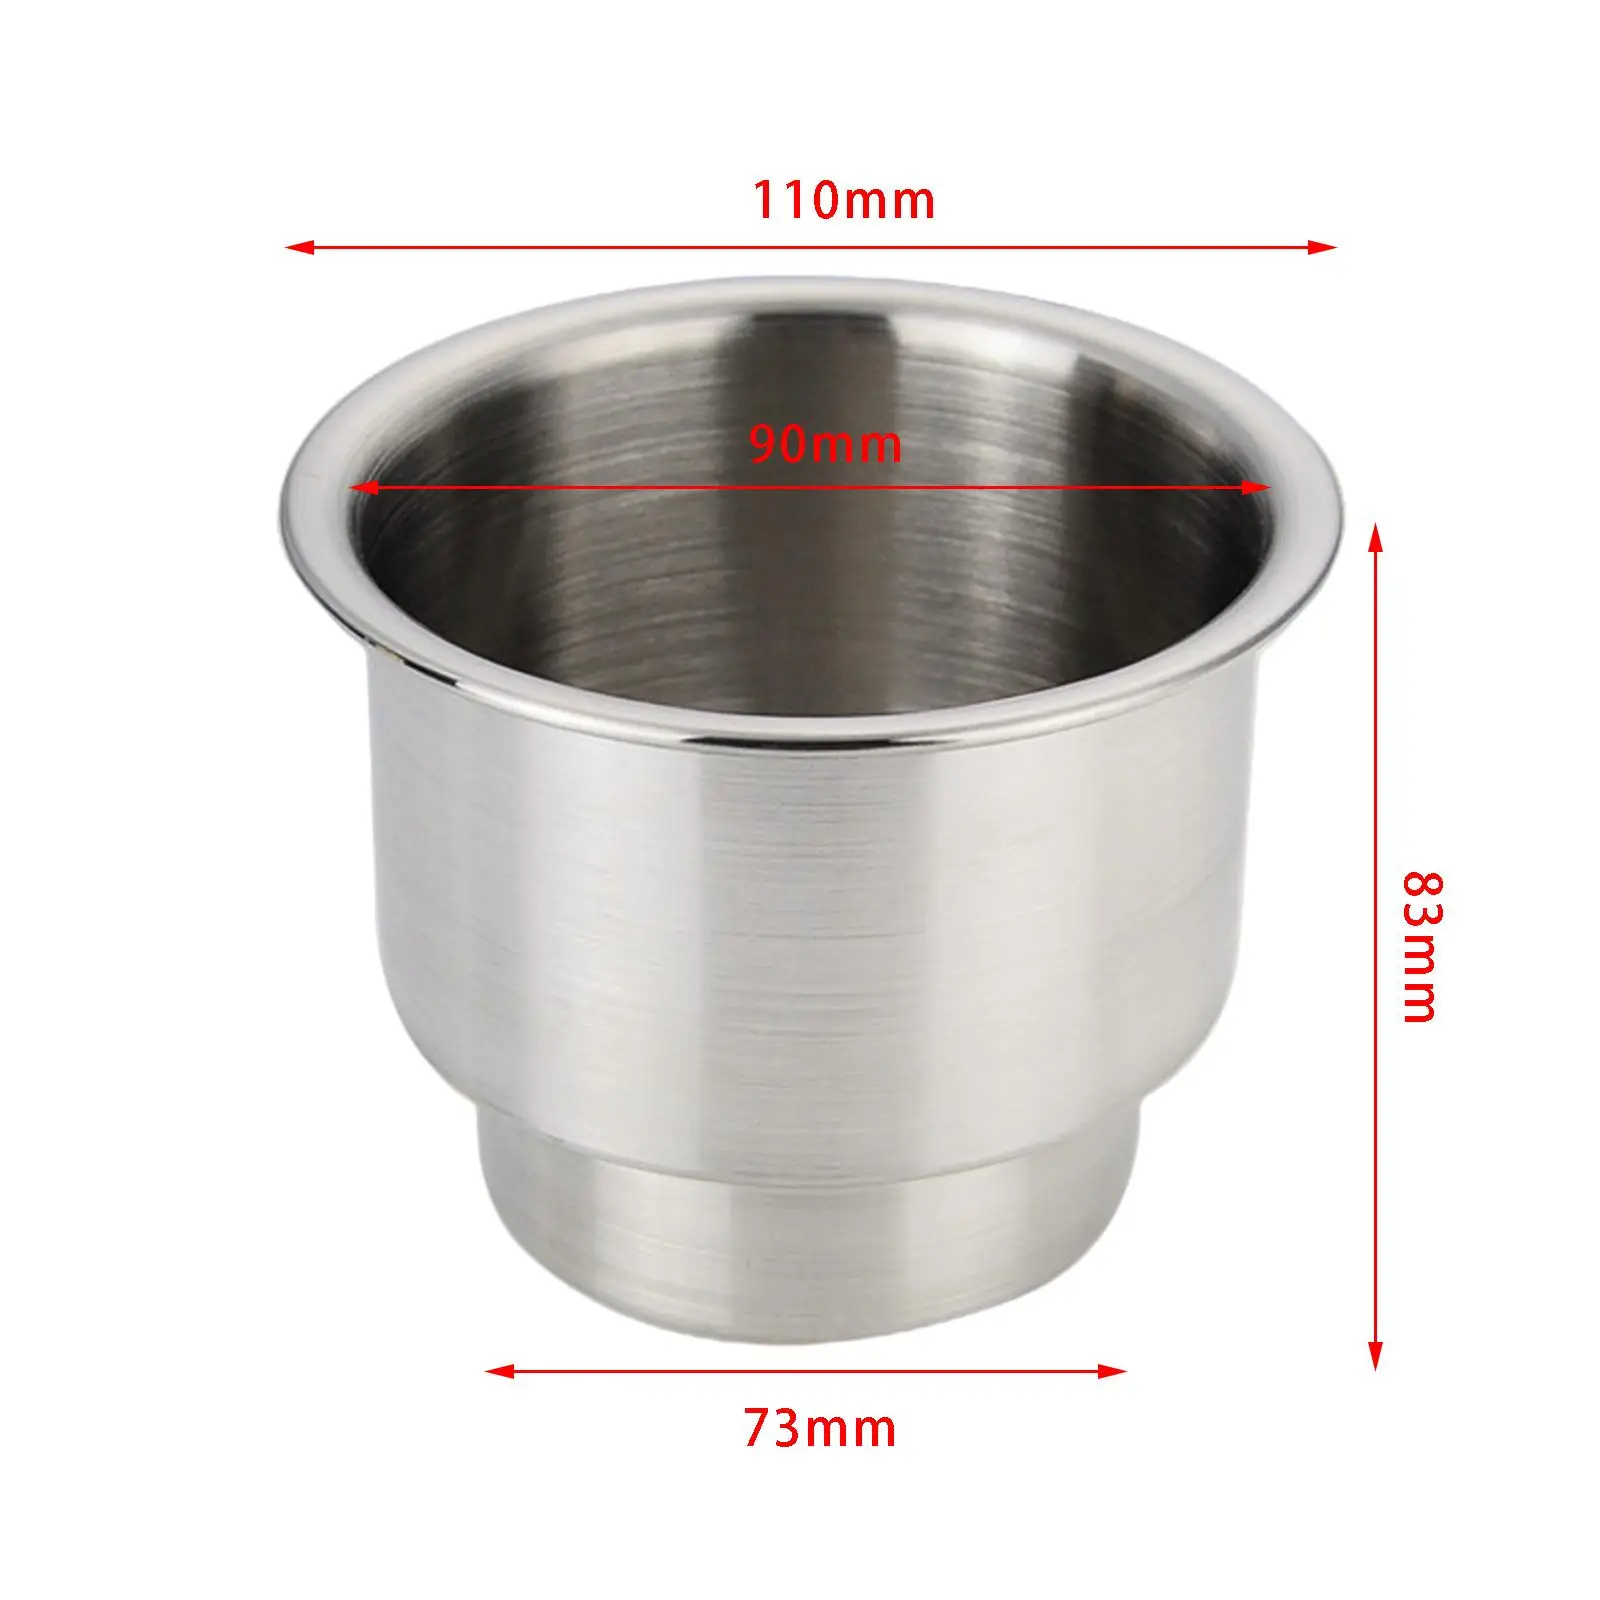 Cup Drink Holder Stainless Steel Recessed Drink Water Bottle Holder Fit for Camper Boat Marine Silver Color 110x83mm